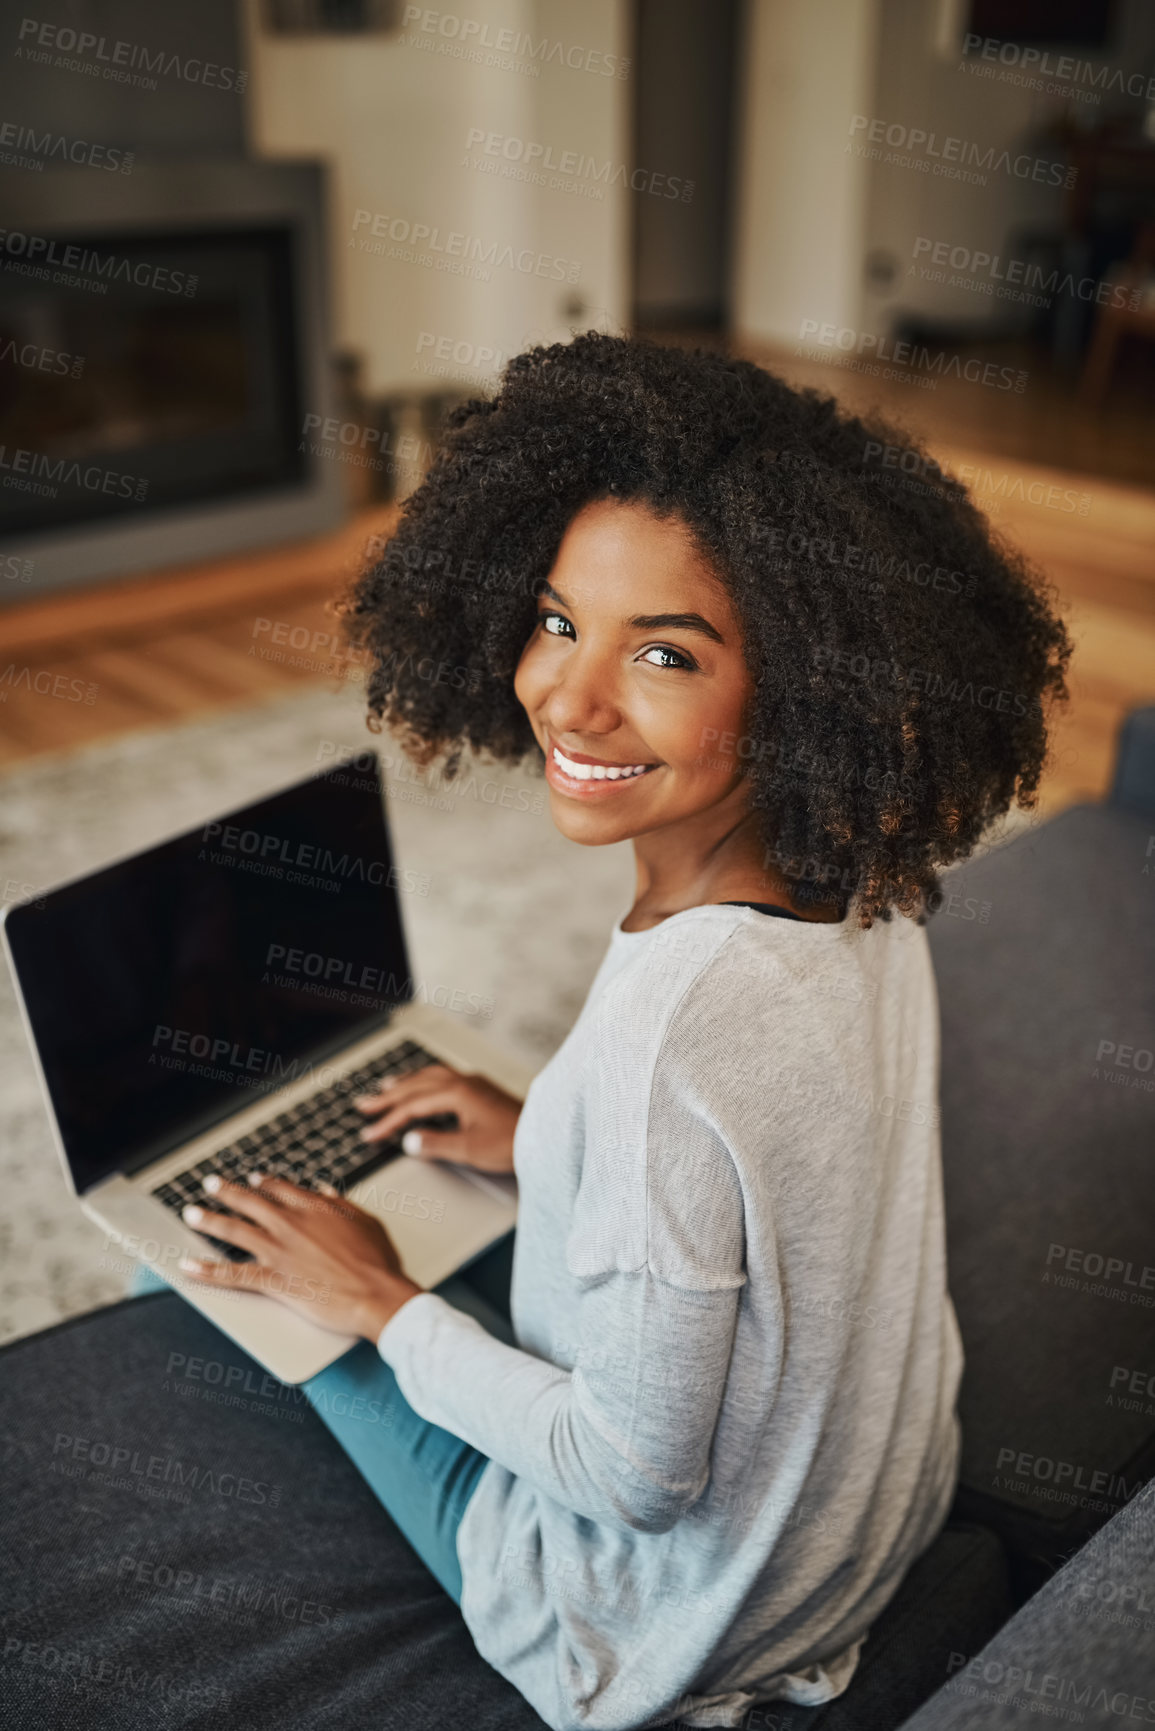 Buy stock photo Portrait of an attractive young woman using a laptop at home